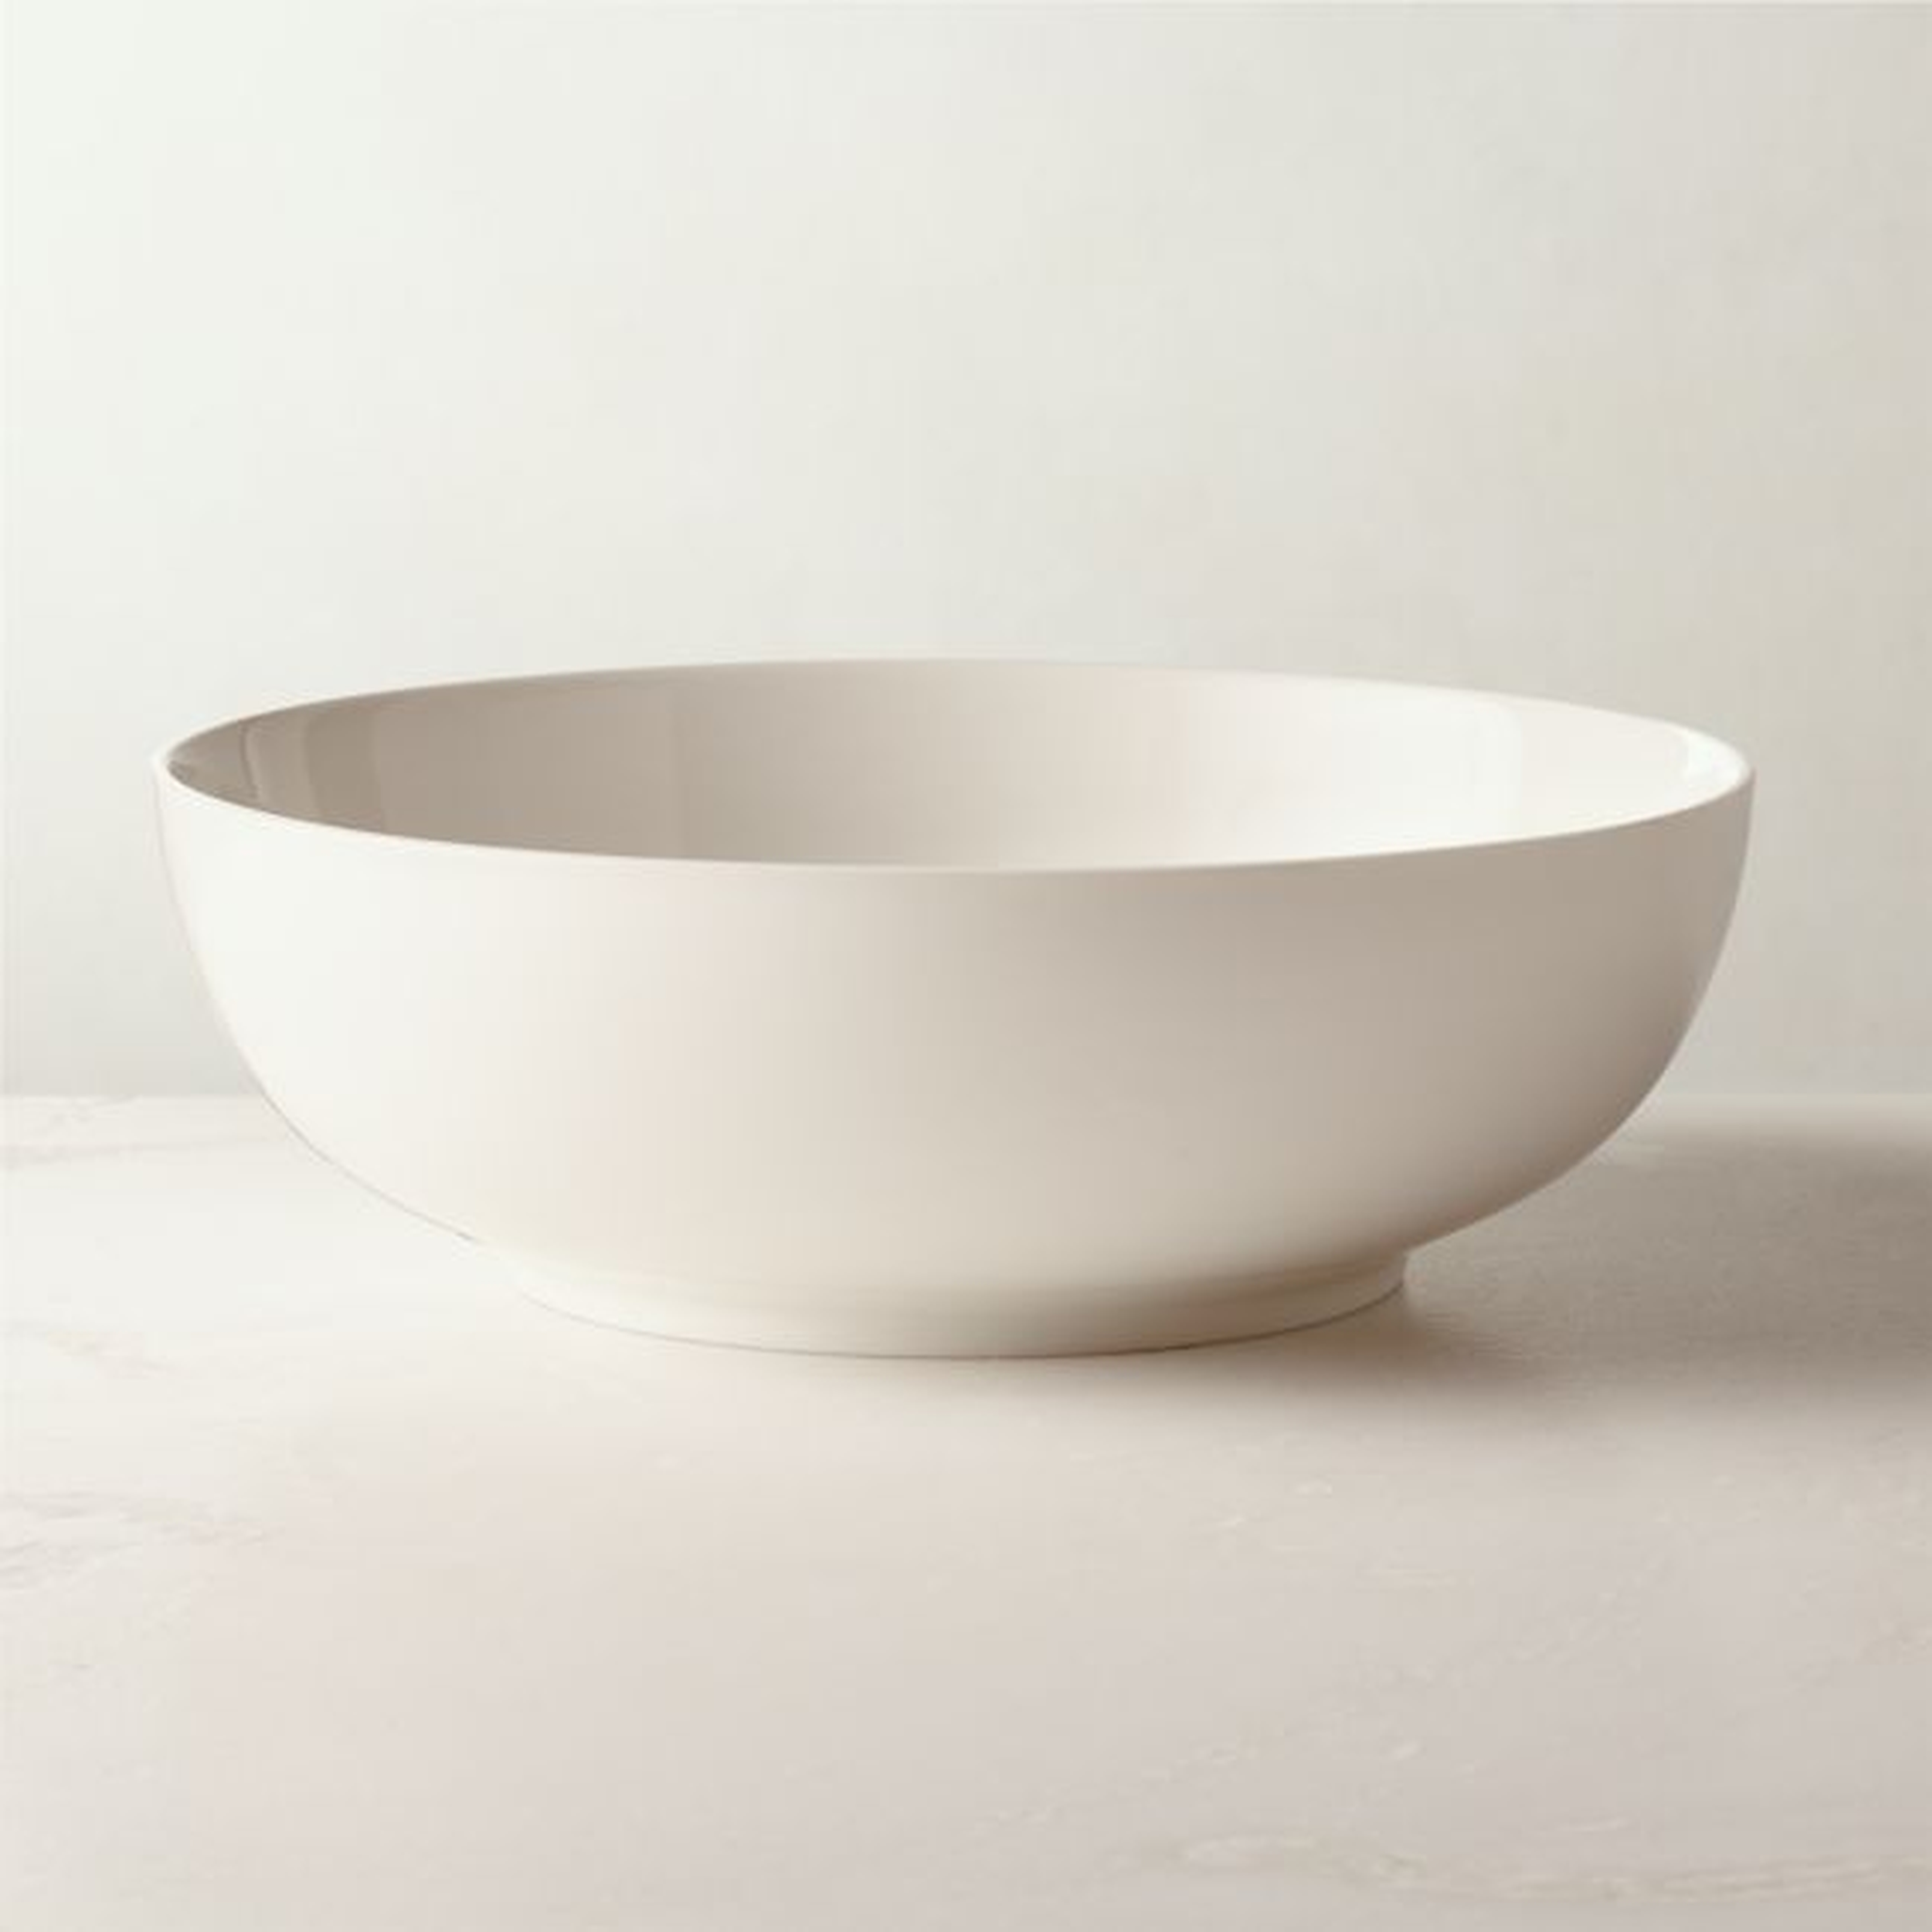 Contact White Serving Bowl - CB2